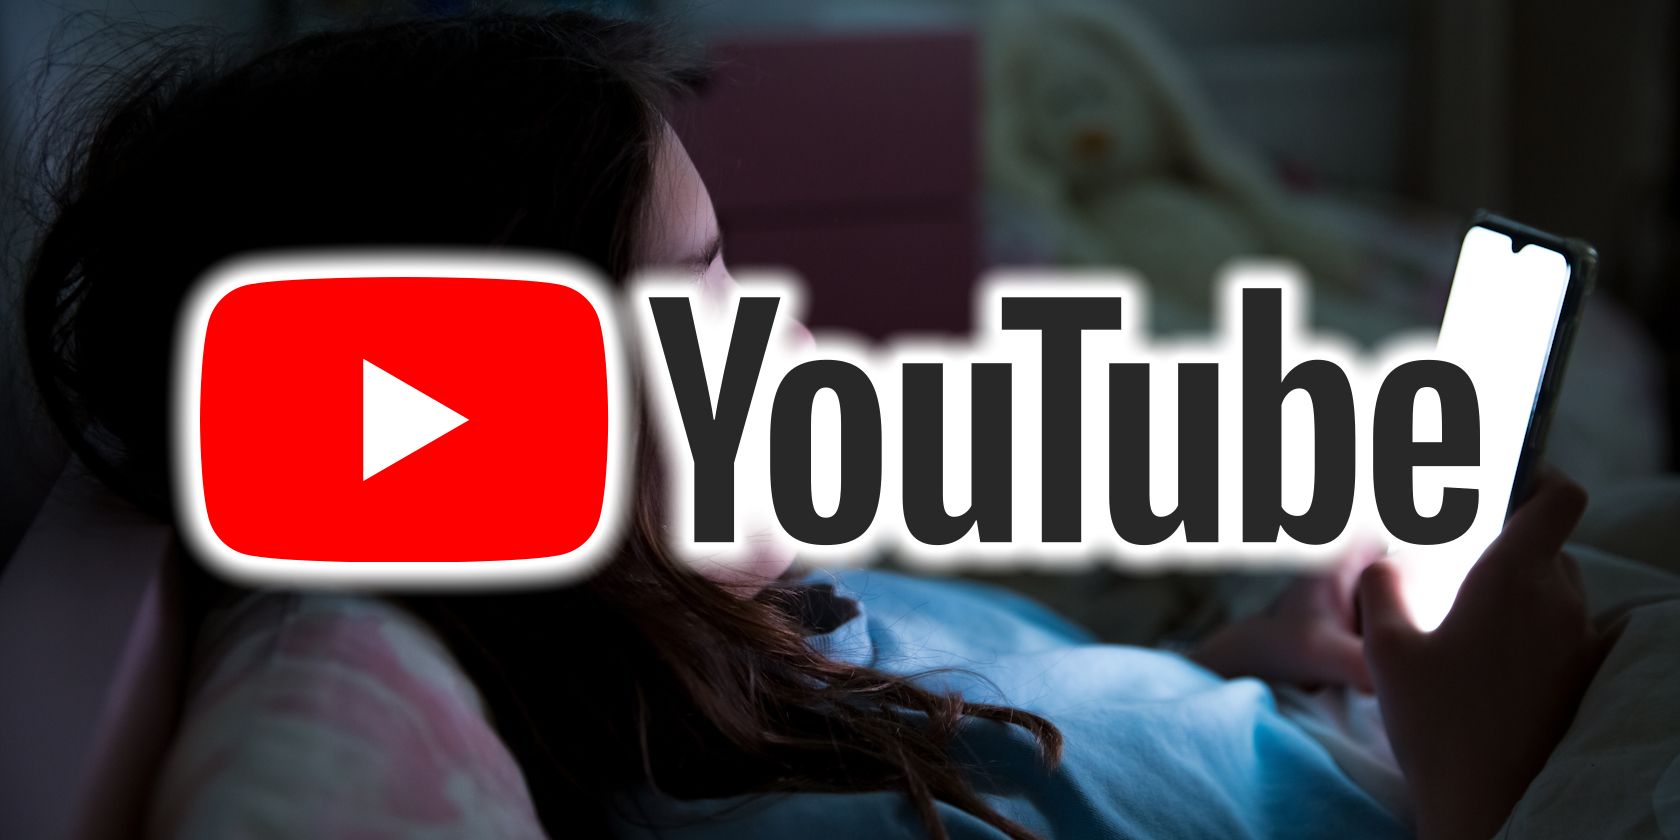 youtube logo with person using smartphone background